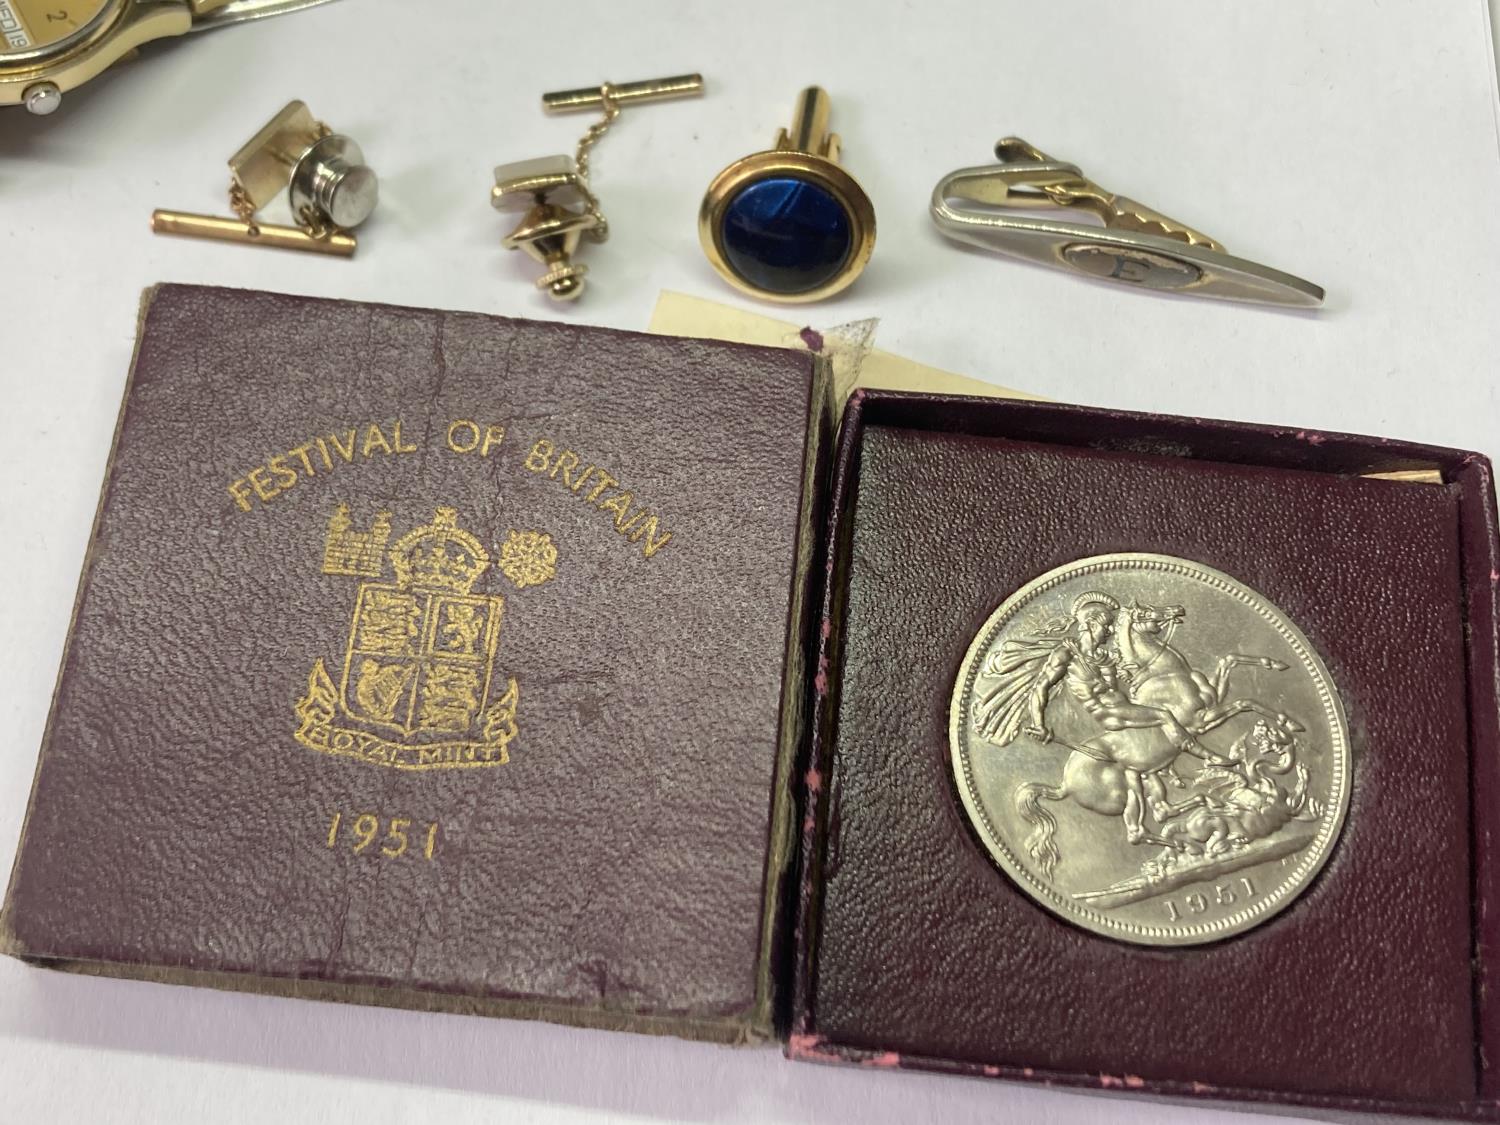 VARIOUS ITEMS TO INCLUDE AN 18 CARAT GOLD PLATED CHAIN, CUFFLINKS, TIE PINS, BOXED FESTIVAL OF - Image 4 of 4